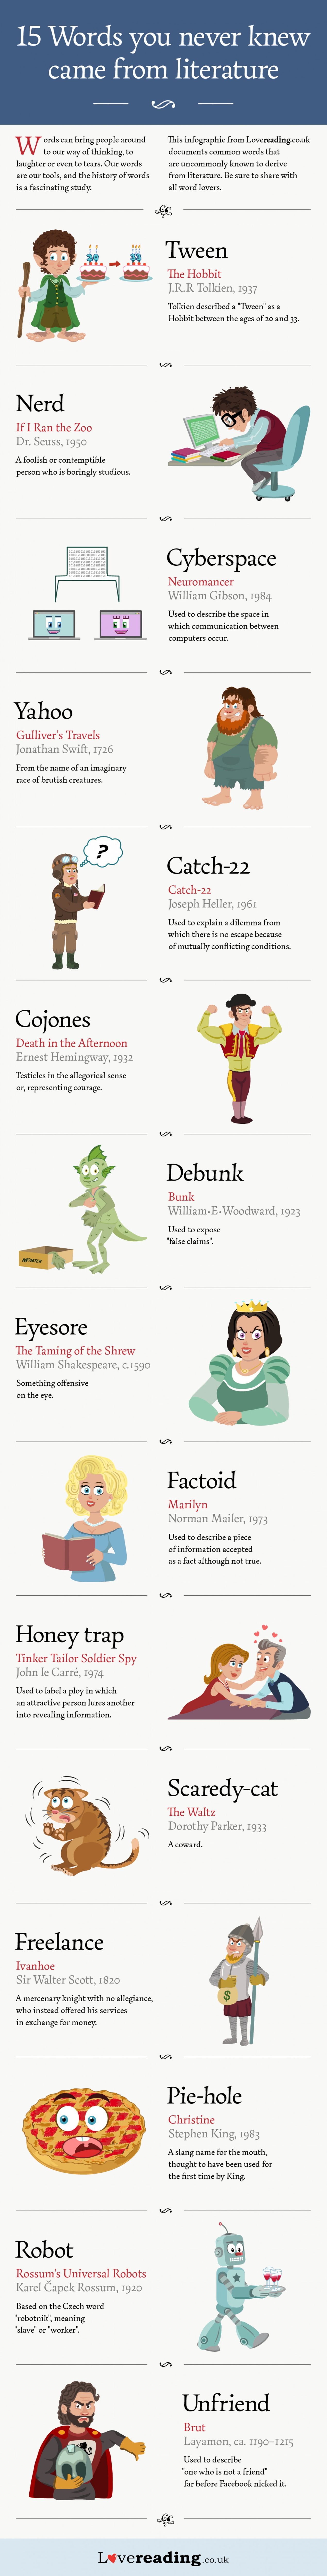 15 words you never knew came from literature (c) Lovereading.co.uk